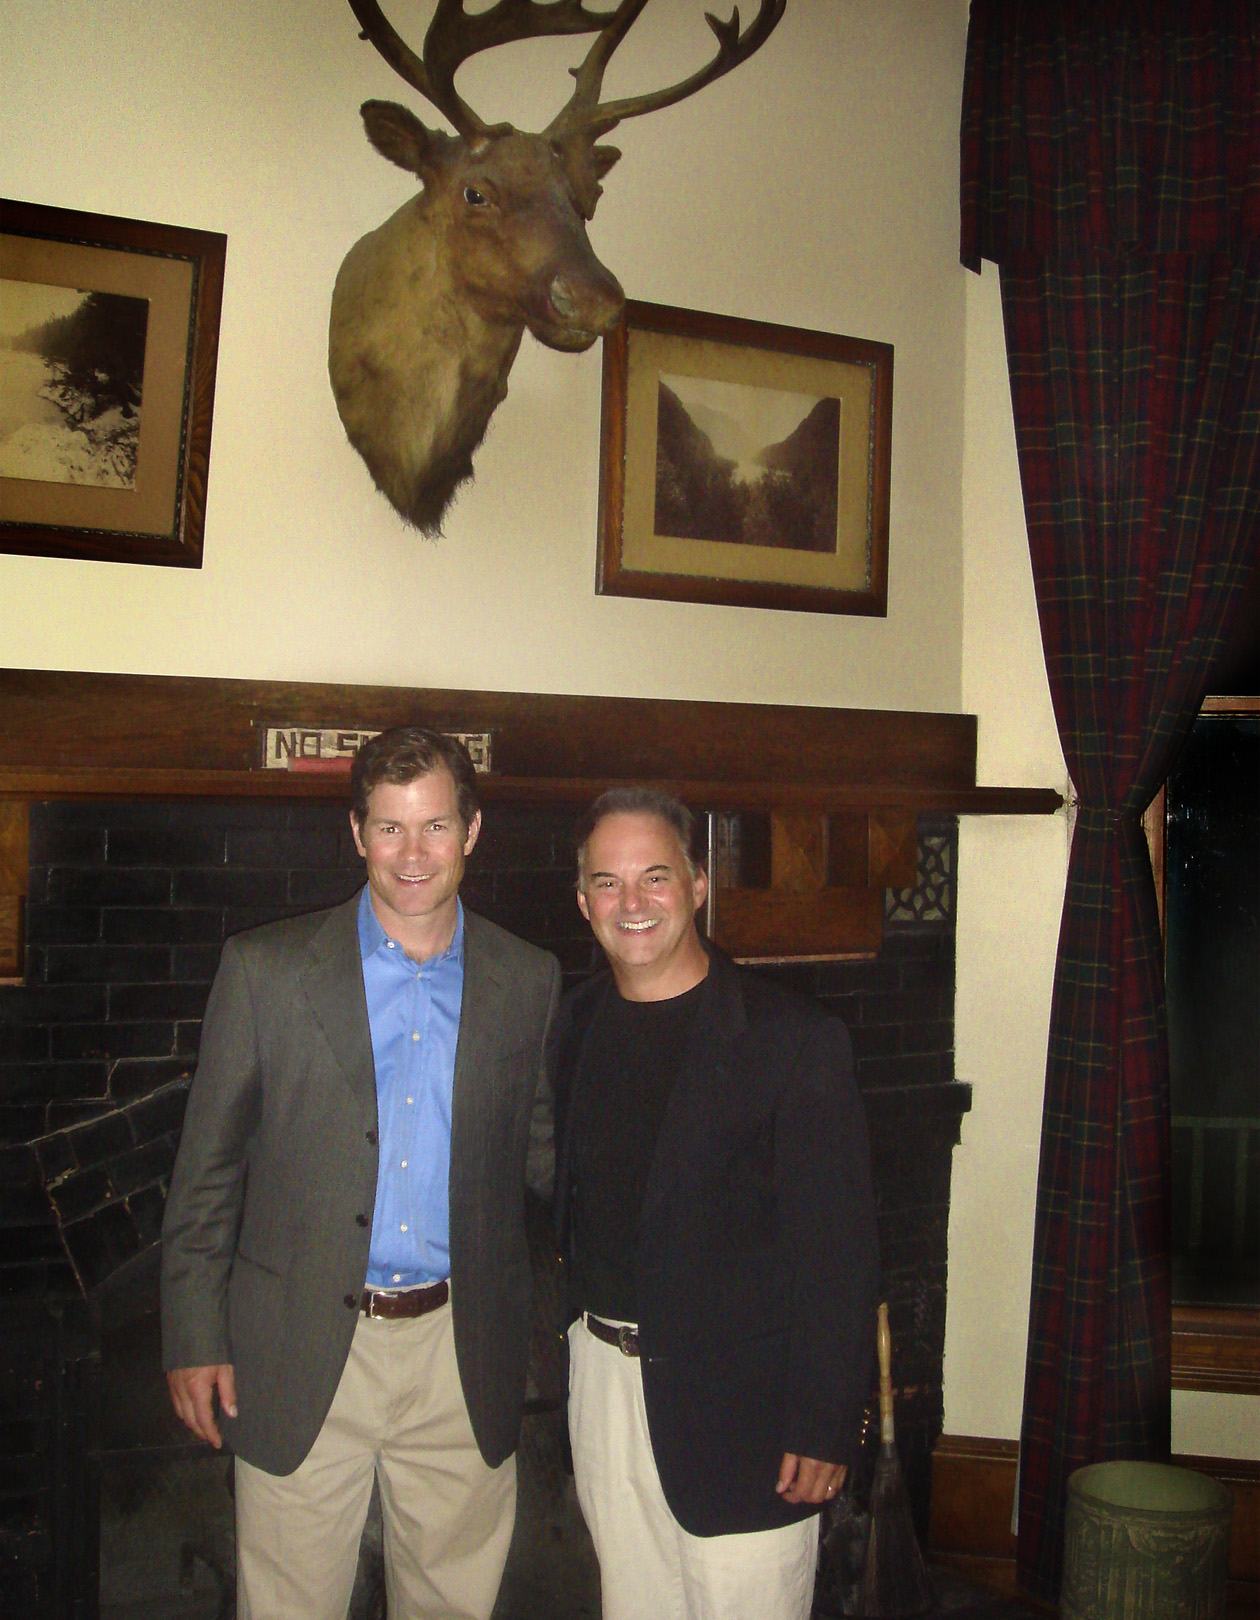 Mike Richter - 1994 Stanley Cup Champion Goal Keeper for The New York Rangers, 1996 Olympic Silver Medalist, 2002 World Cup Winner and Hall of Fame net minder with Rick Ford at The Ausable Club, St Huberts, NY